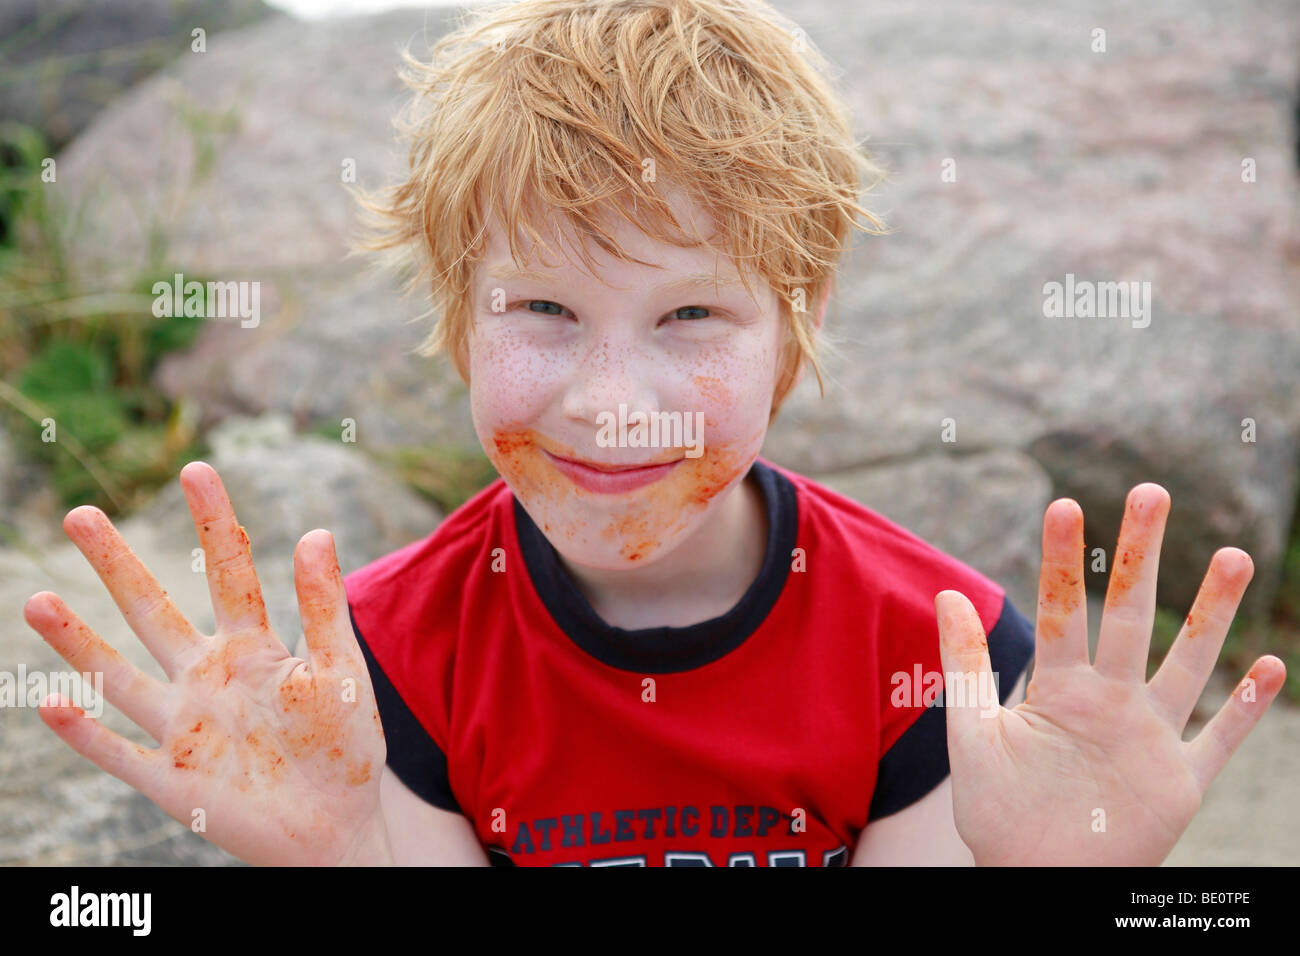 portrait of a young boy showing his dirty hands after eating Stock Photo